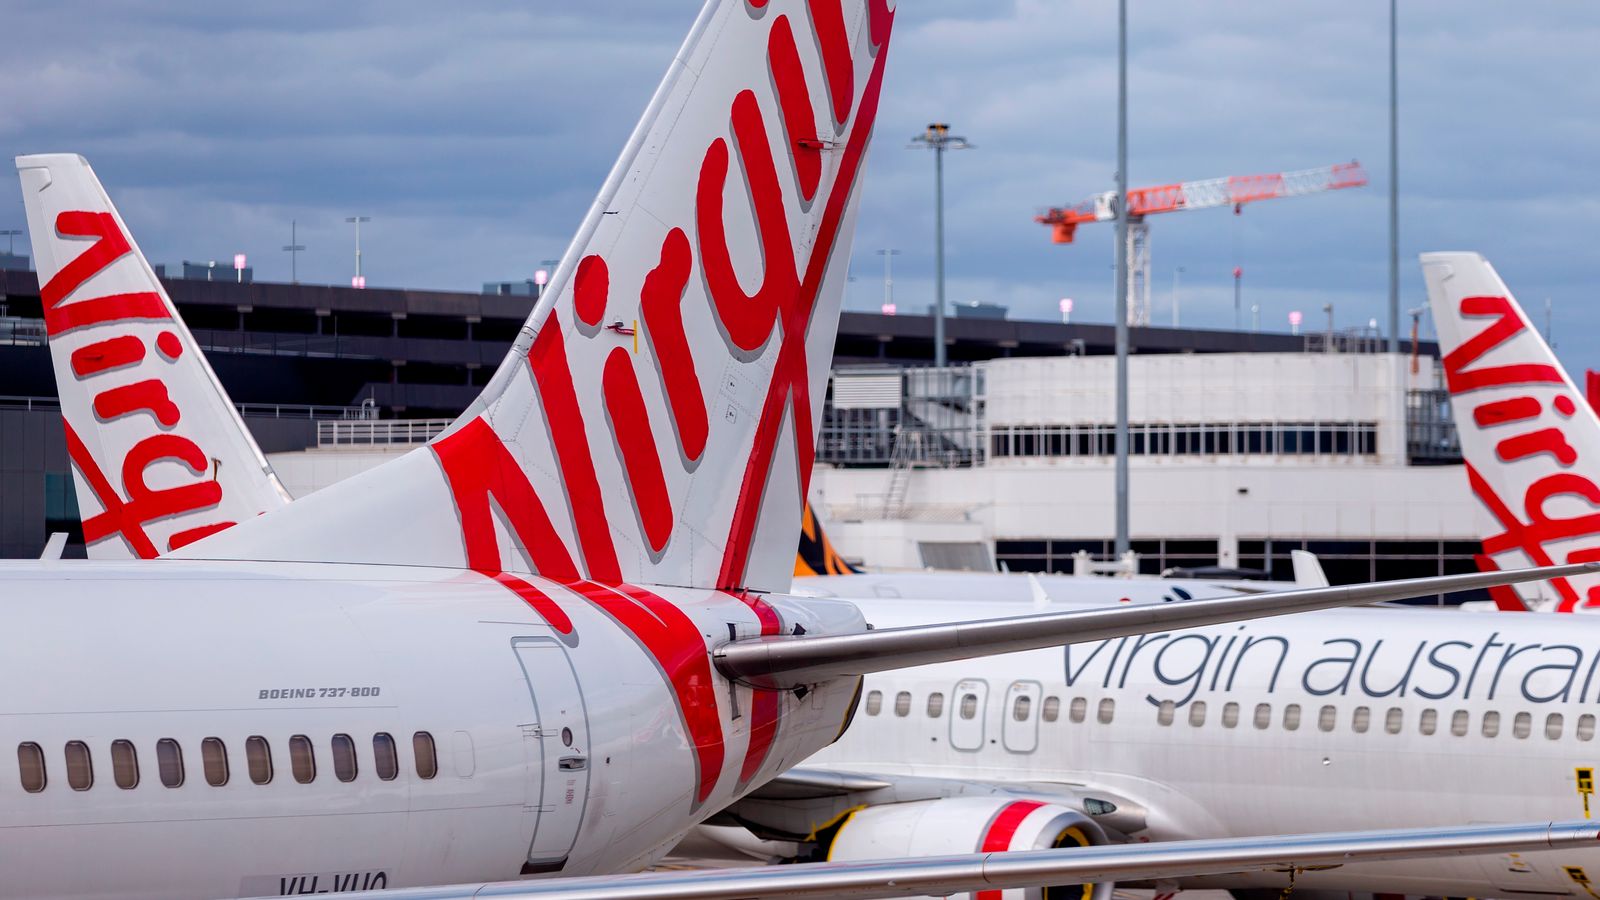 Man who 'ran through Virgin Australia plane naked and knocked over attendant' arrested